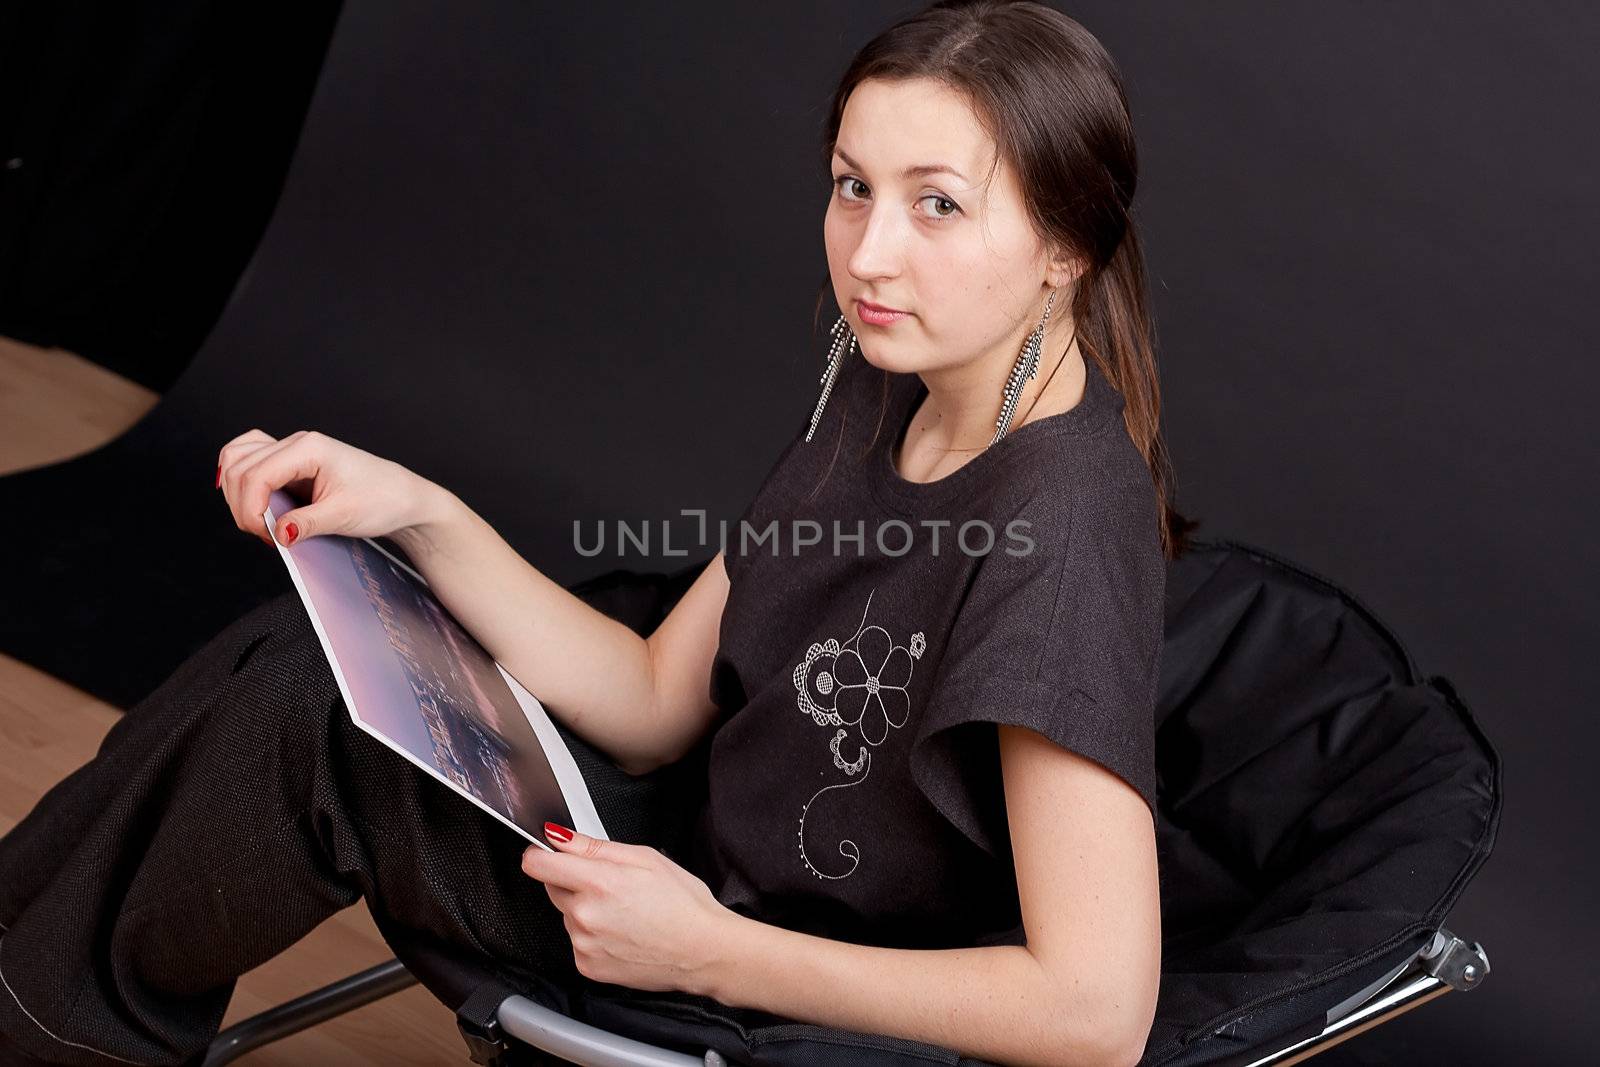 A serious girl sitting on a chair and looks into the camera studio photography